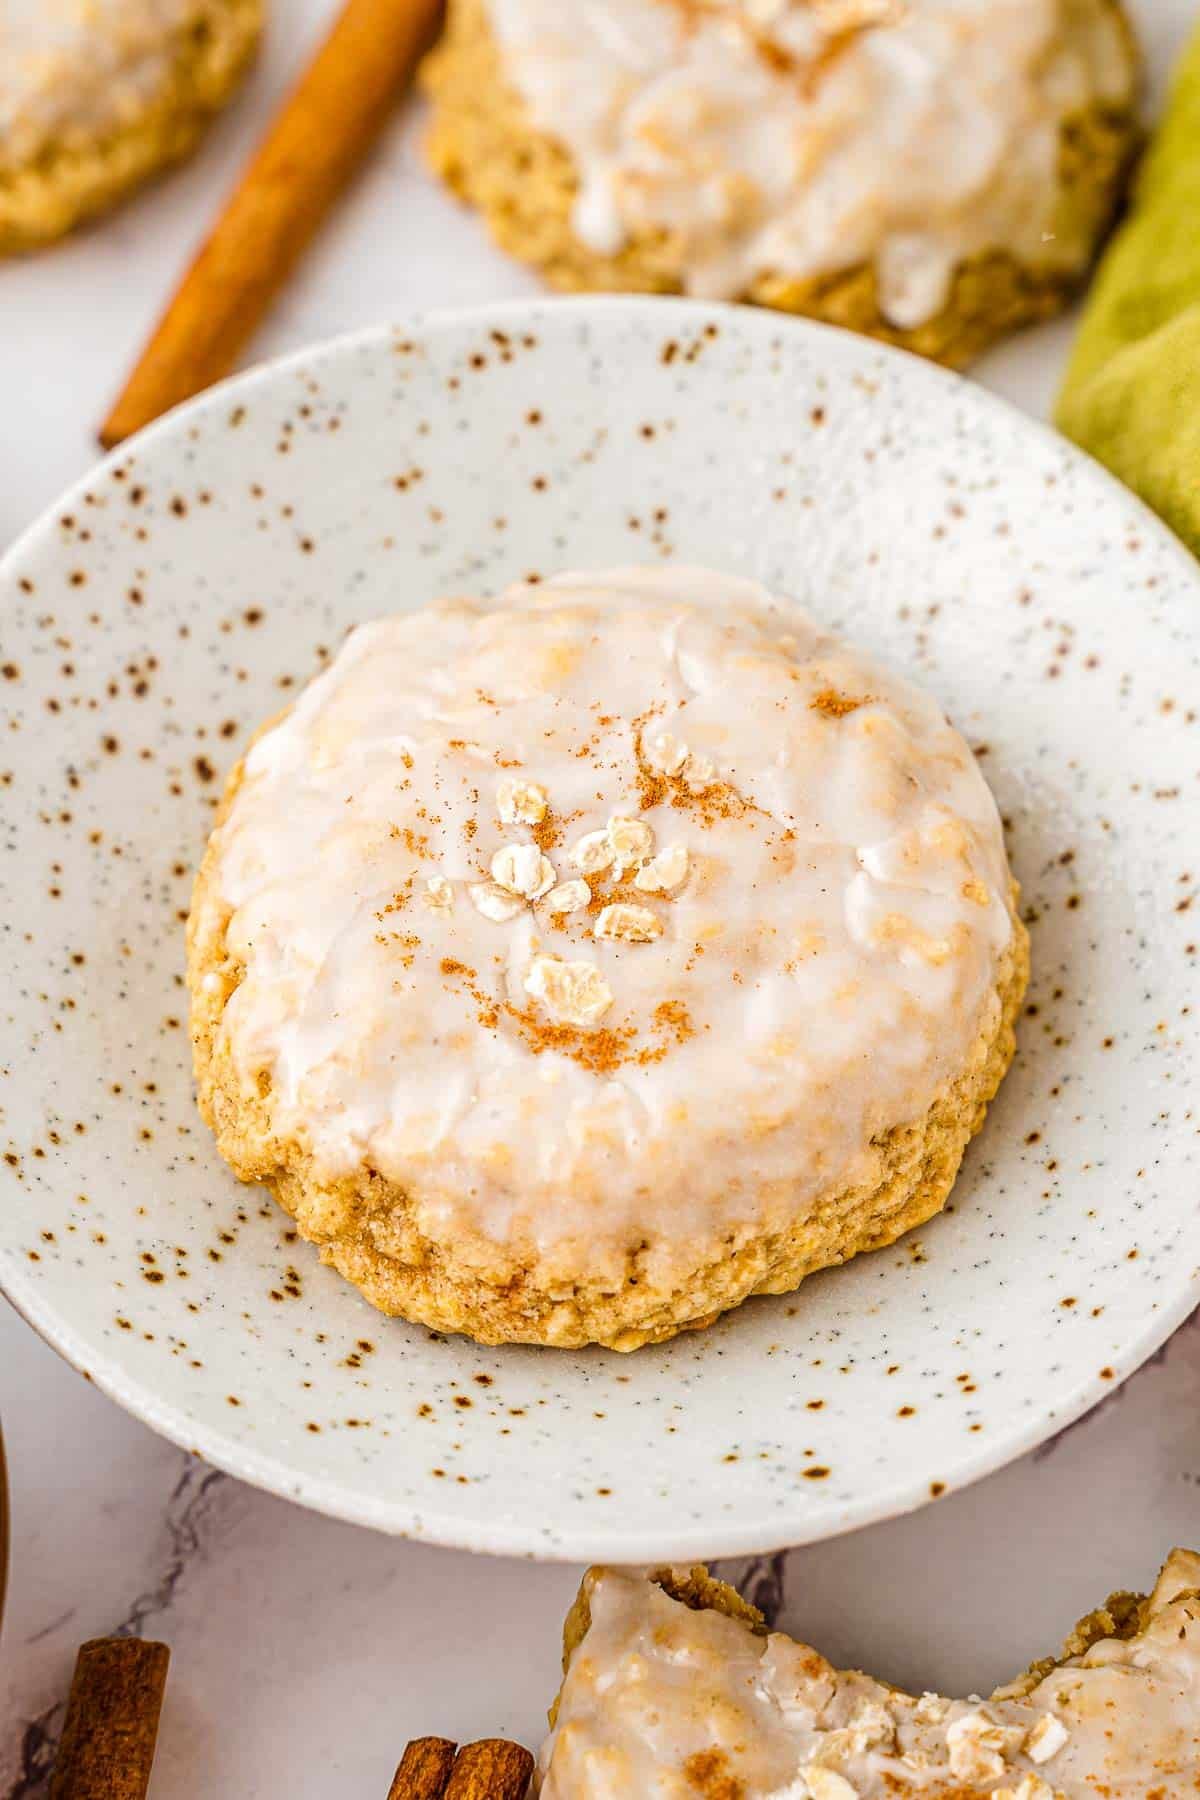 A plate with an iced oatmeal cookie on it.